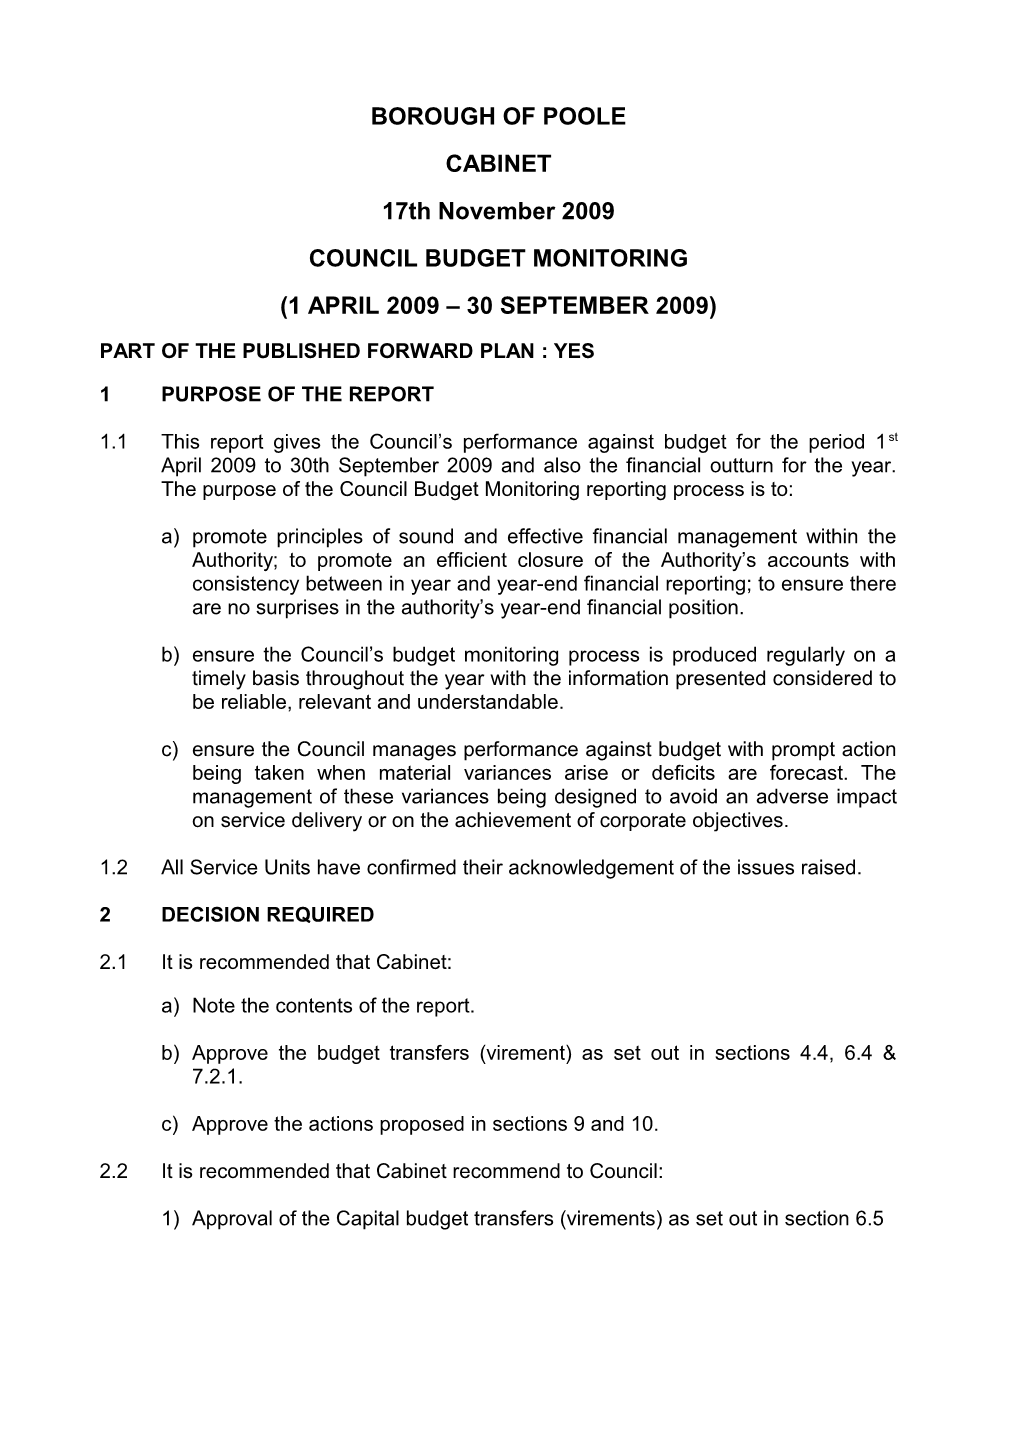 Council Budget Monitoring Report - Revised